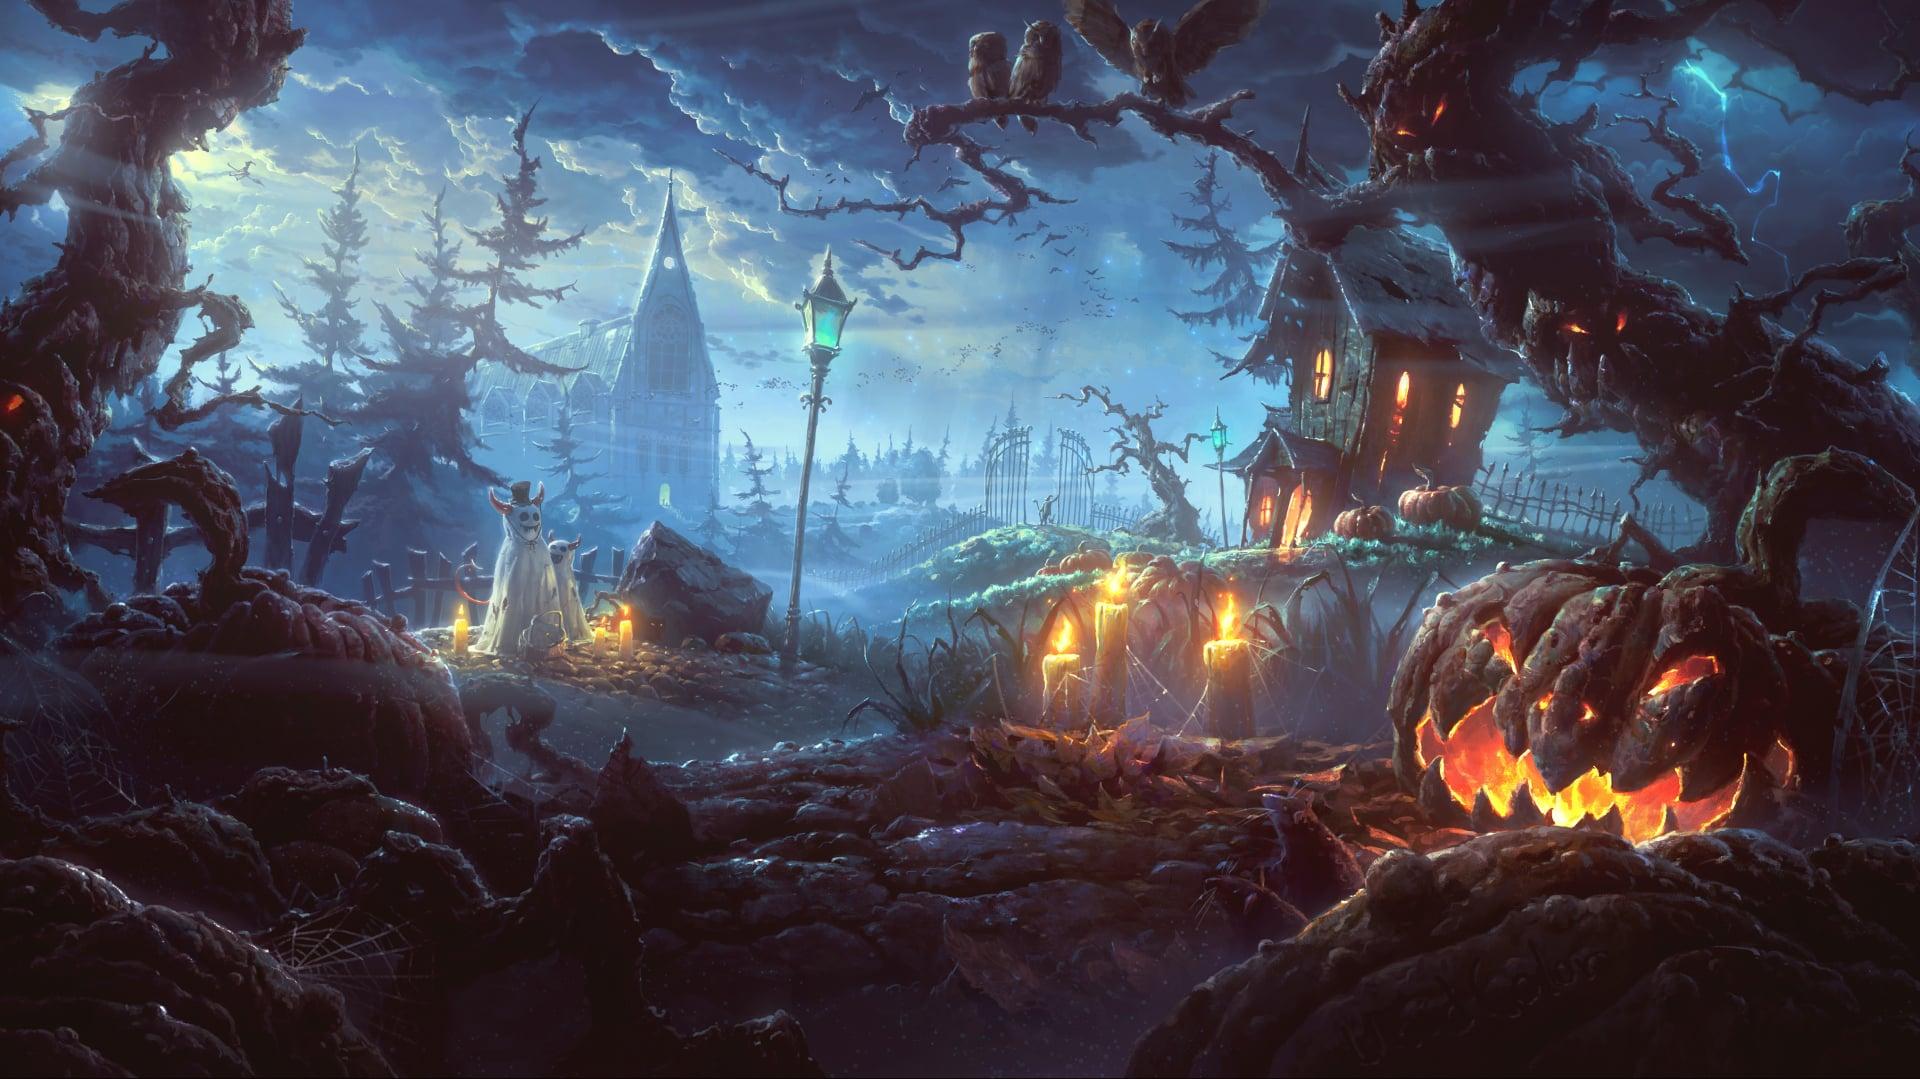 This Is In My Opinion The Best Halloween Wallpaper That Exists